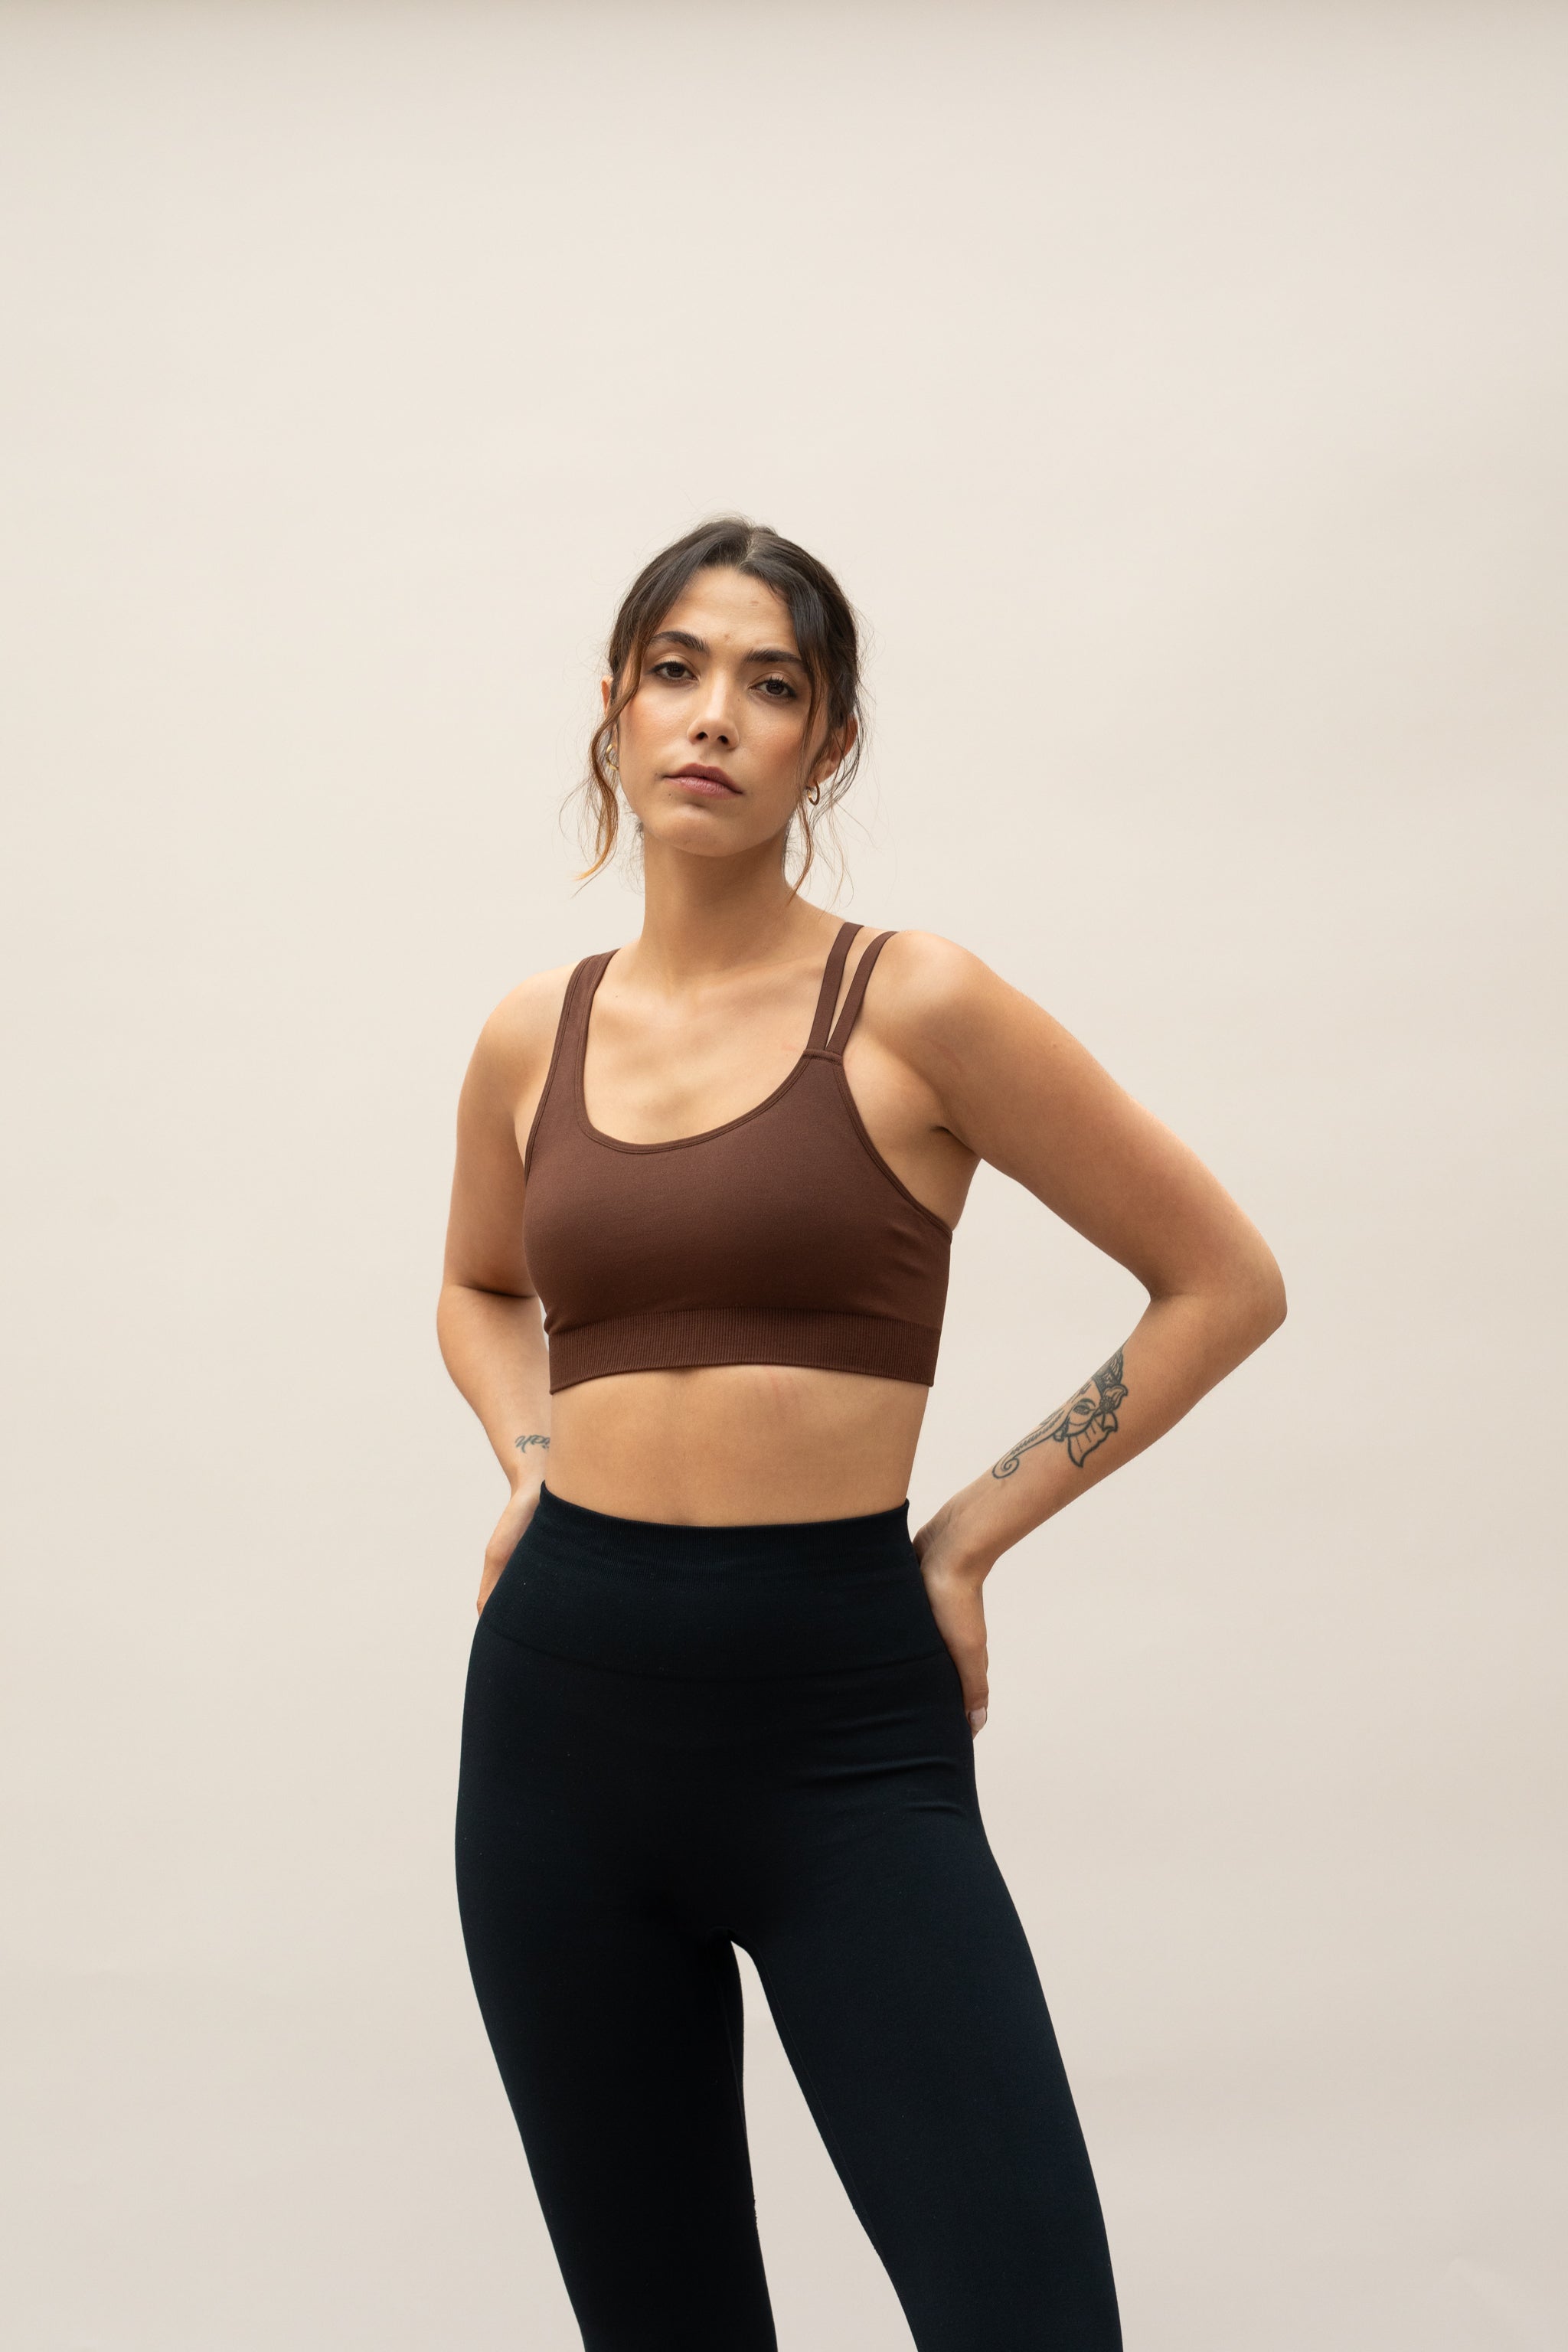 Model wearing brown shorts and supportive sports bra for sustainable activewear brand, Jilla.